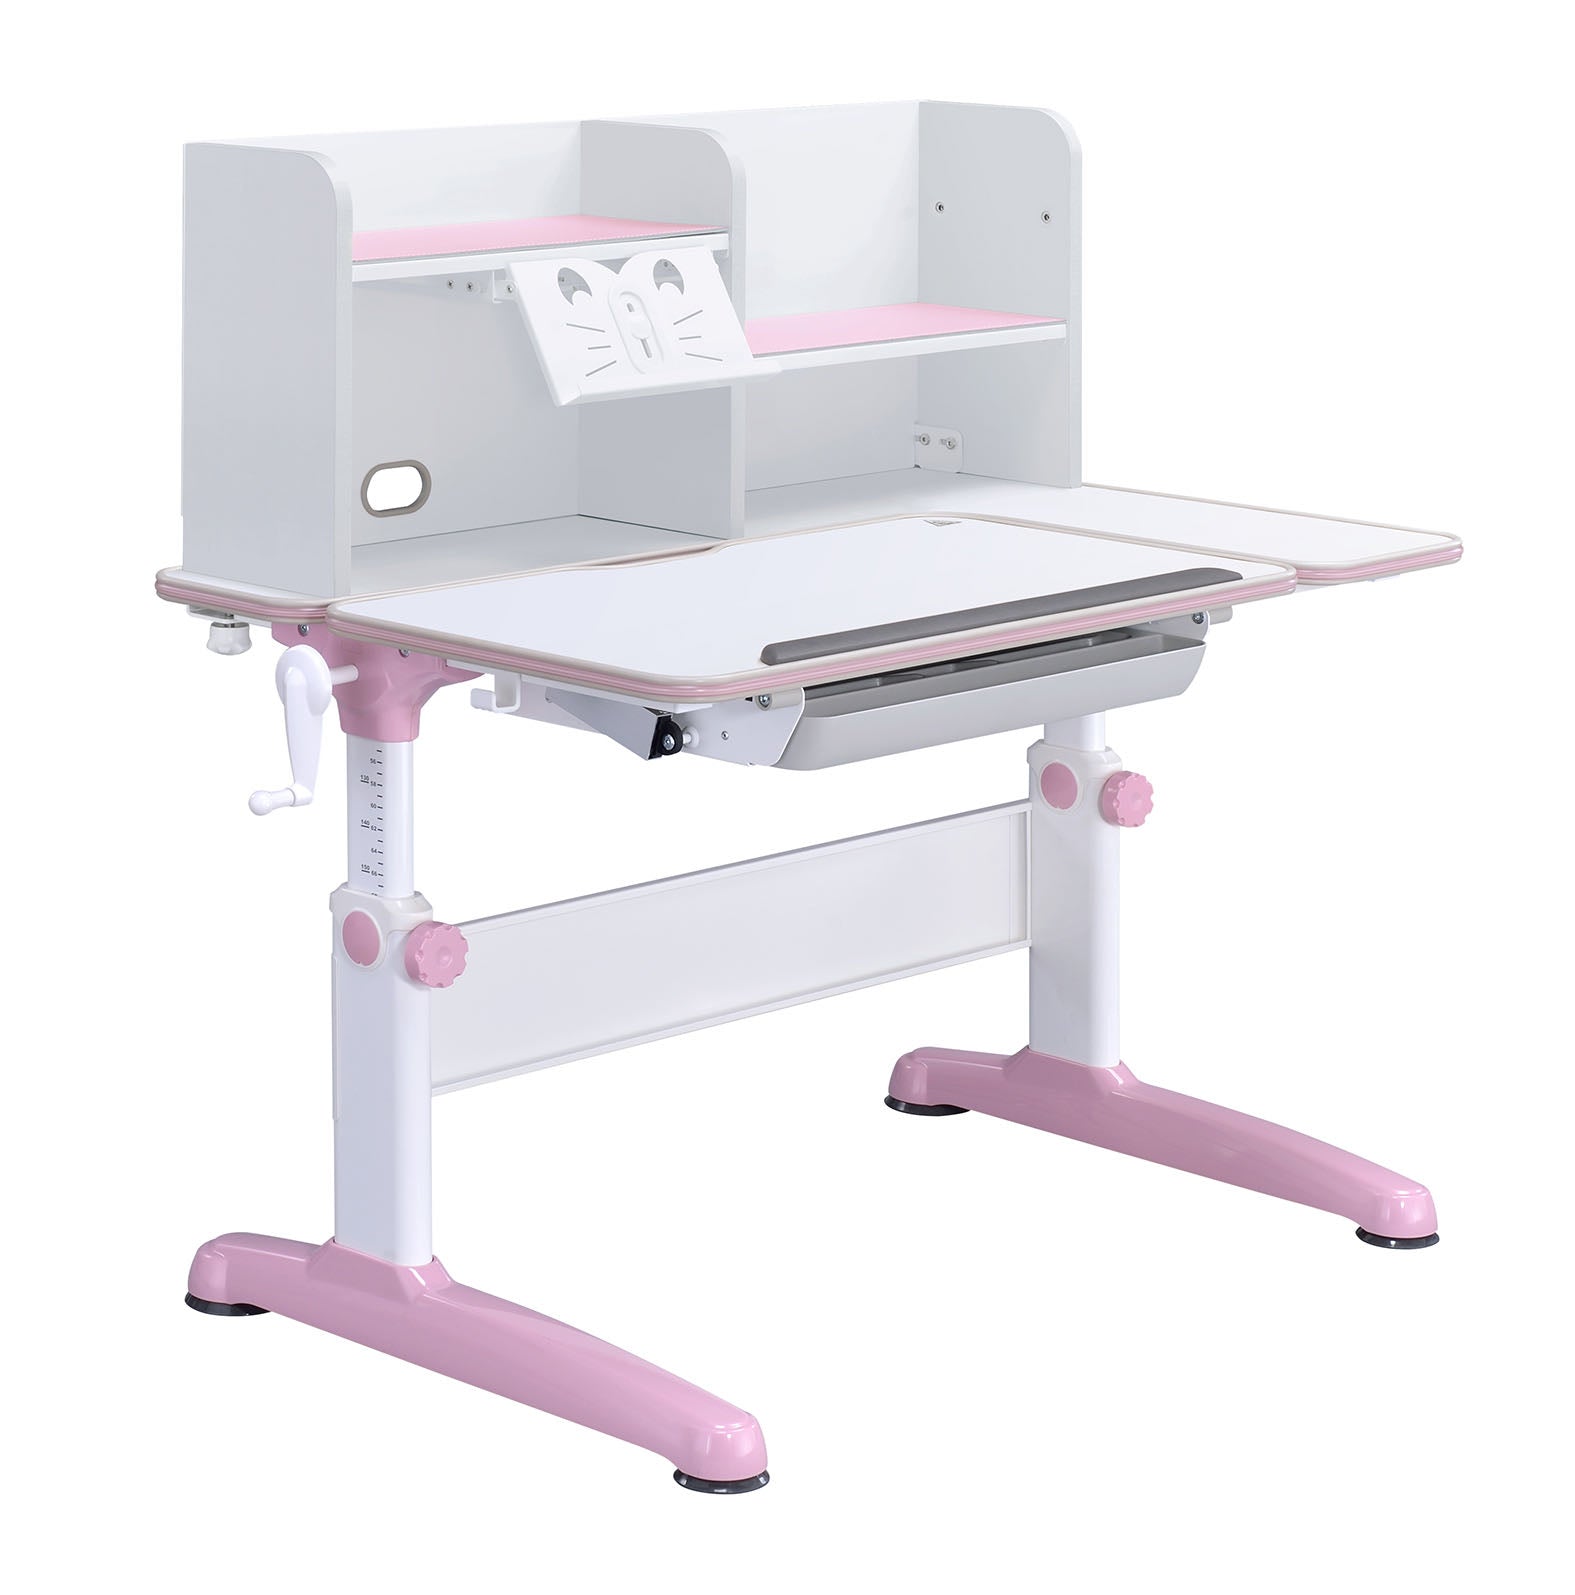 Childrens study desk pink -learning stations that are height-adjustable, tilt-adjustable, and grow with the child – simply ergonomic